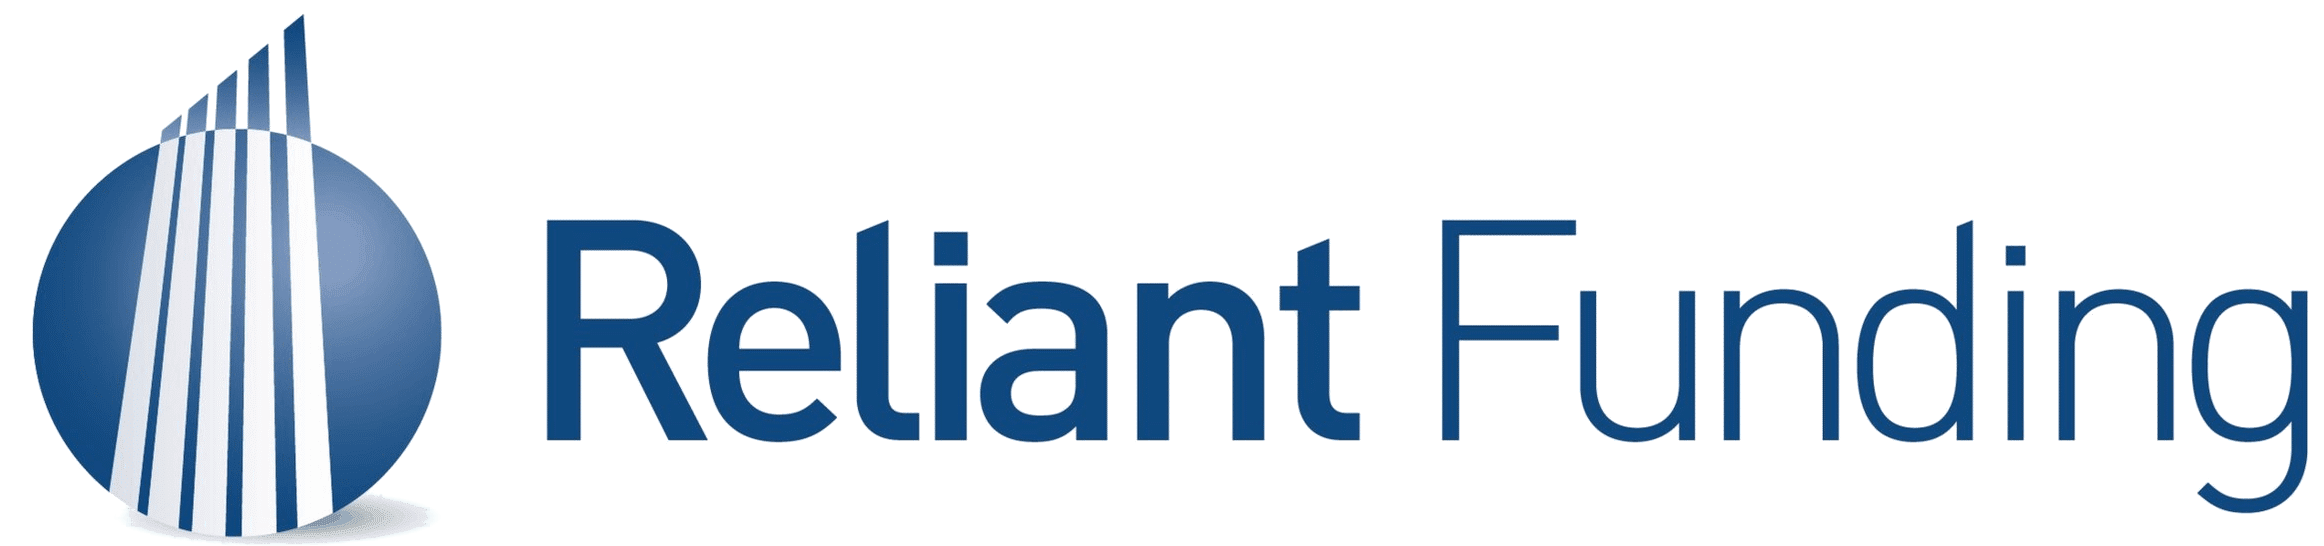 How to apply for Reliant Funding Business Loan